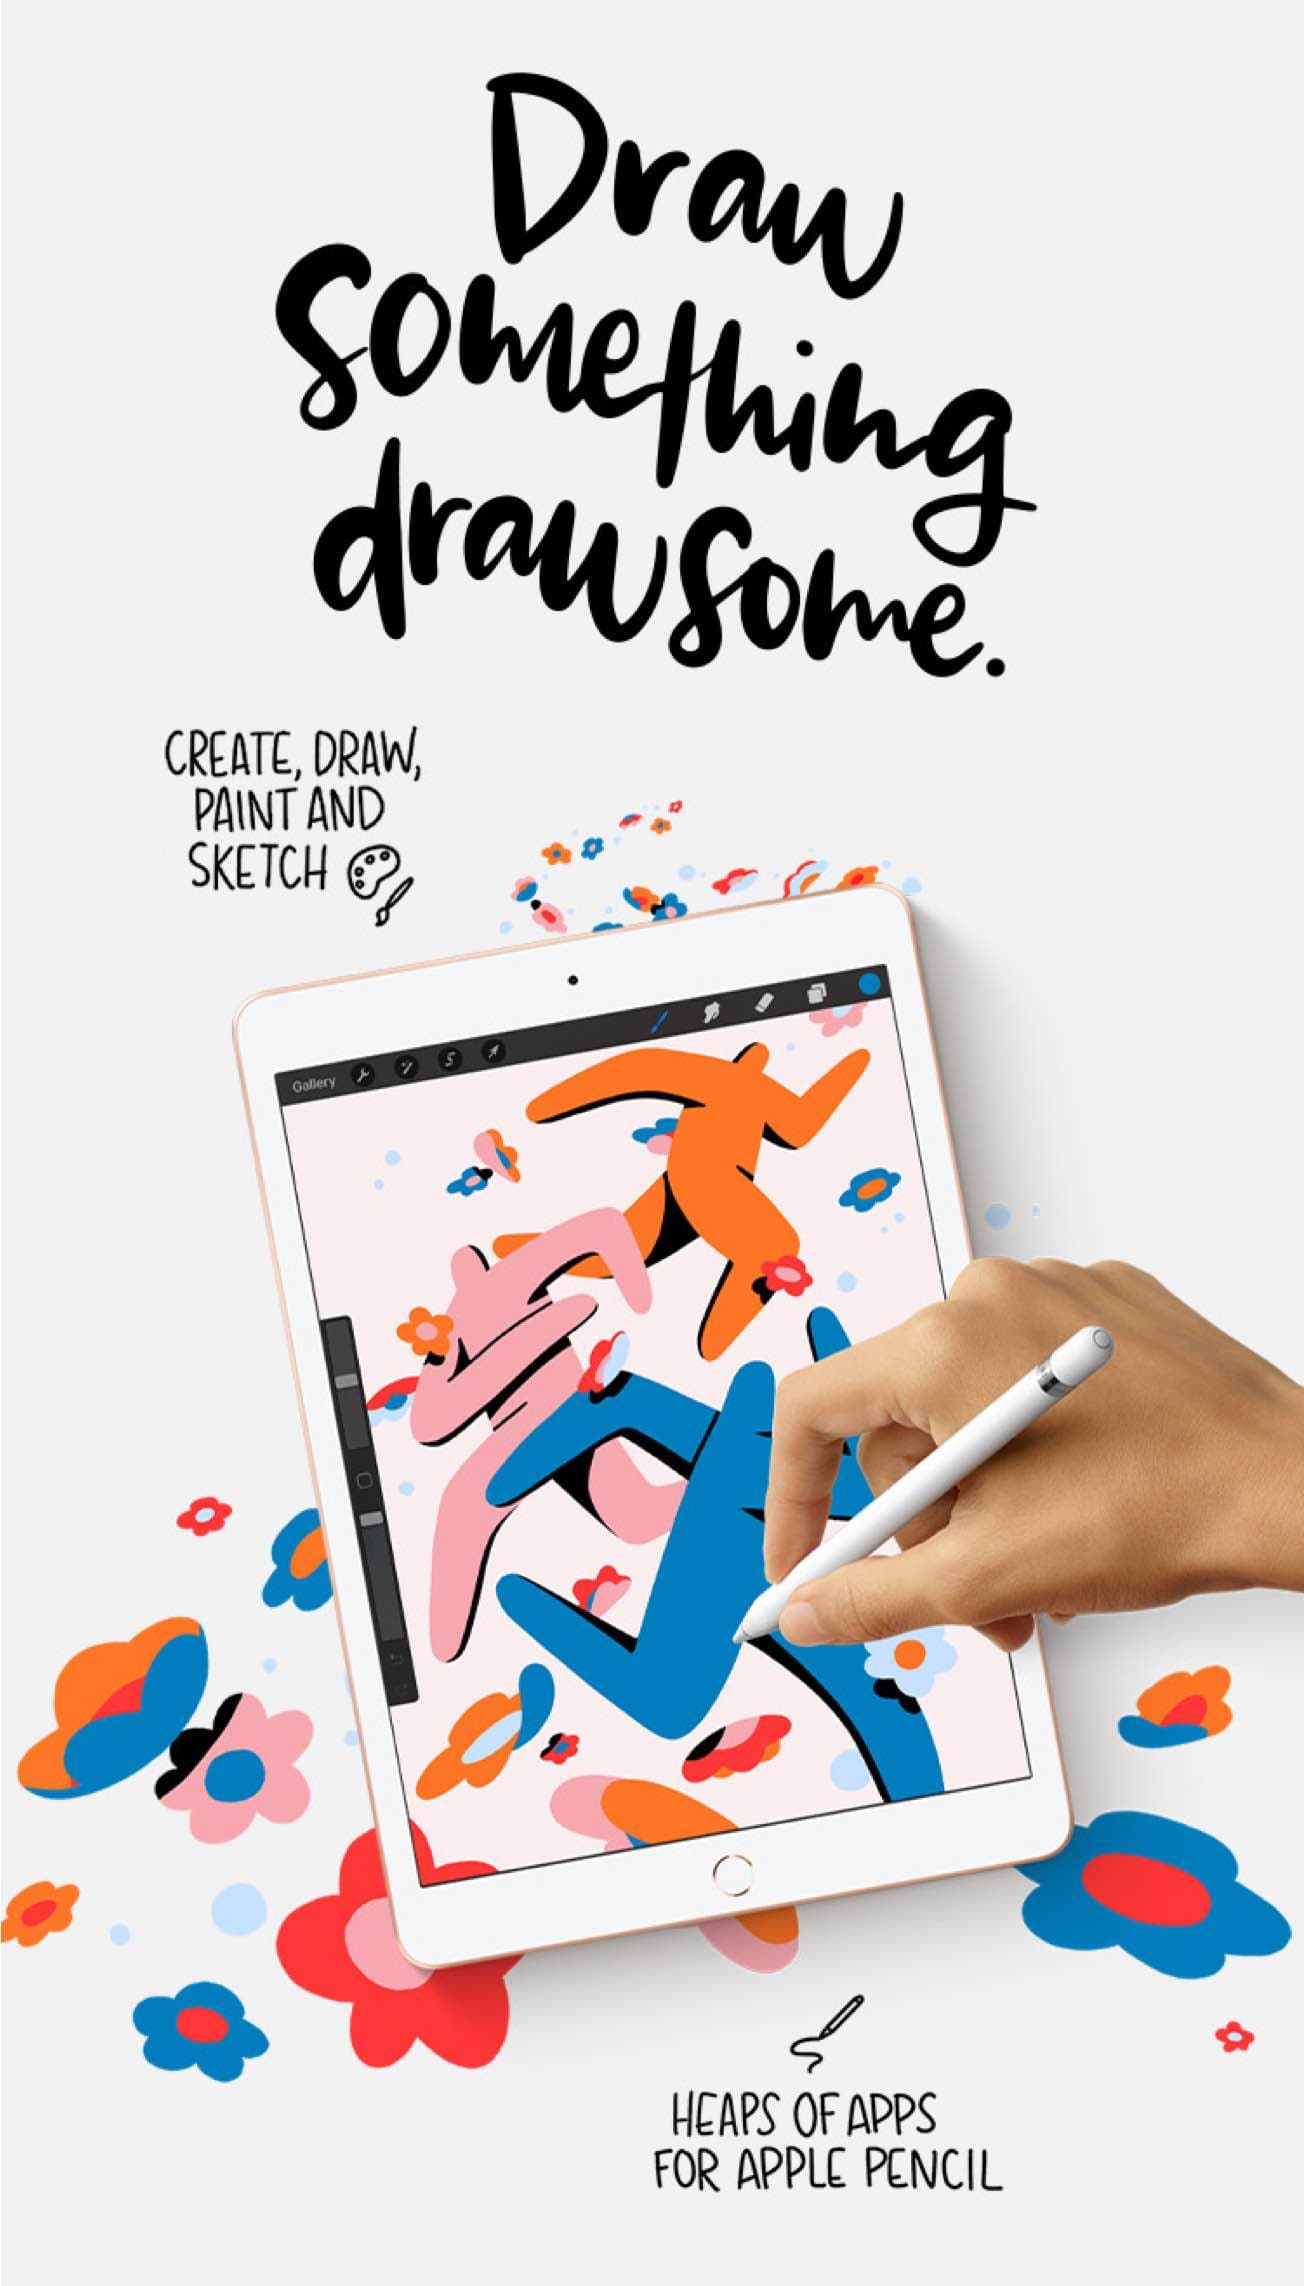 Create, draw paint and sketch with heaps of apps for the apple pencil